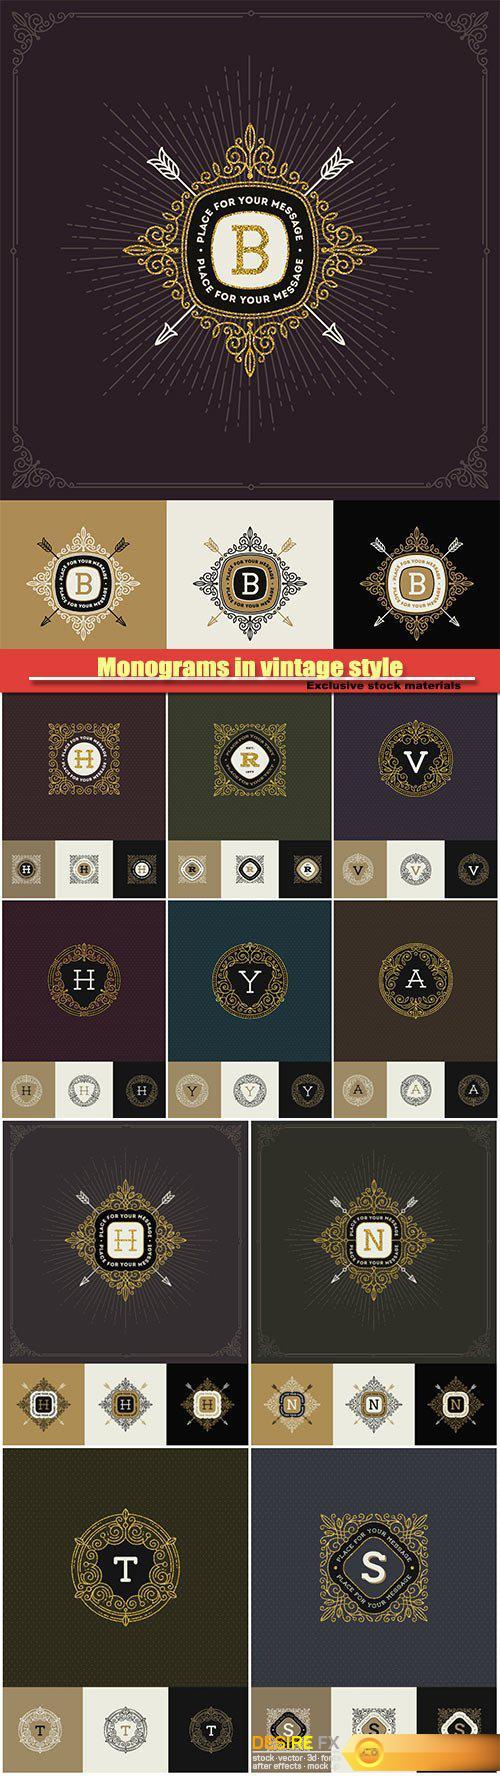 Monograms in vintage style, vector illustration